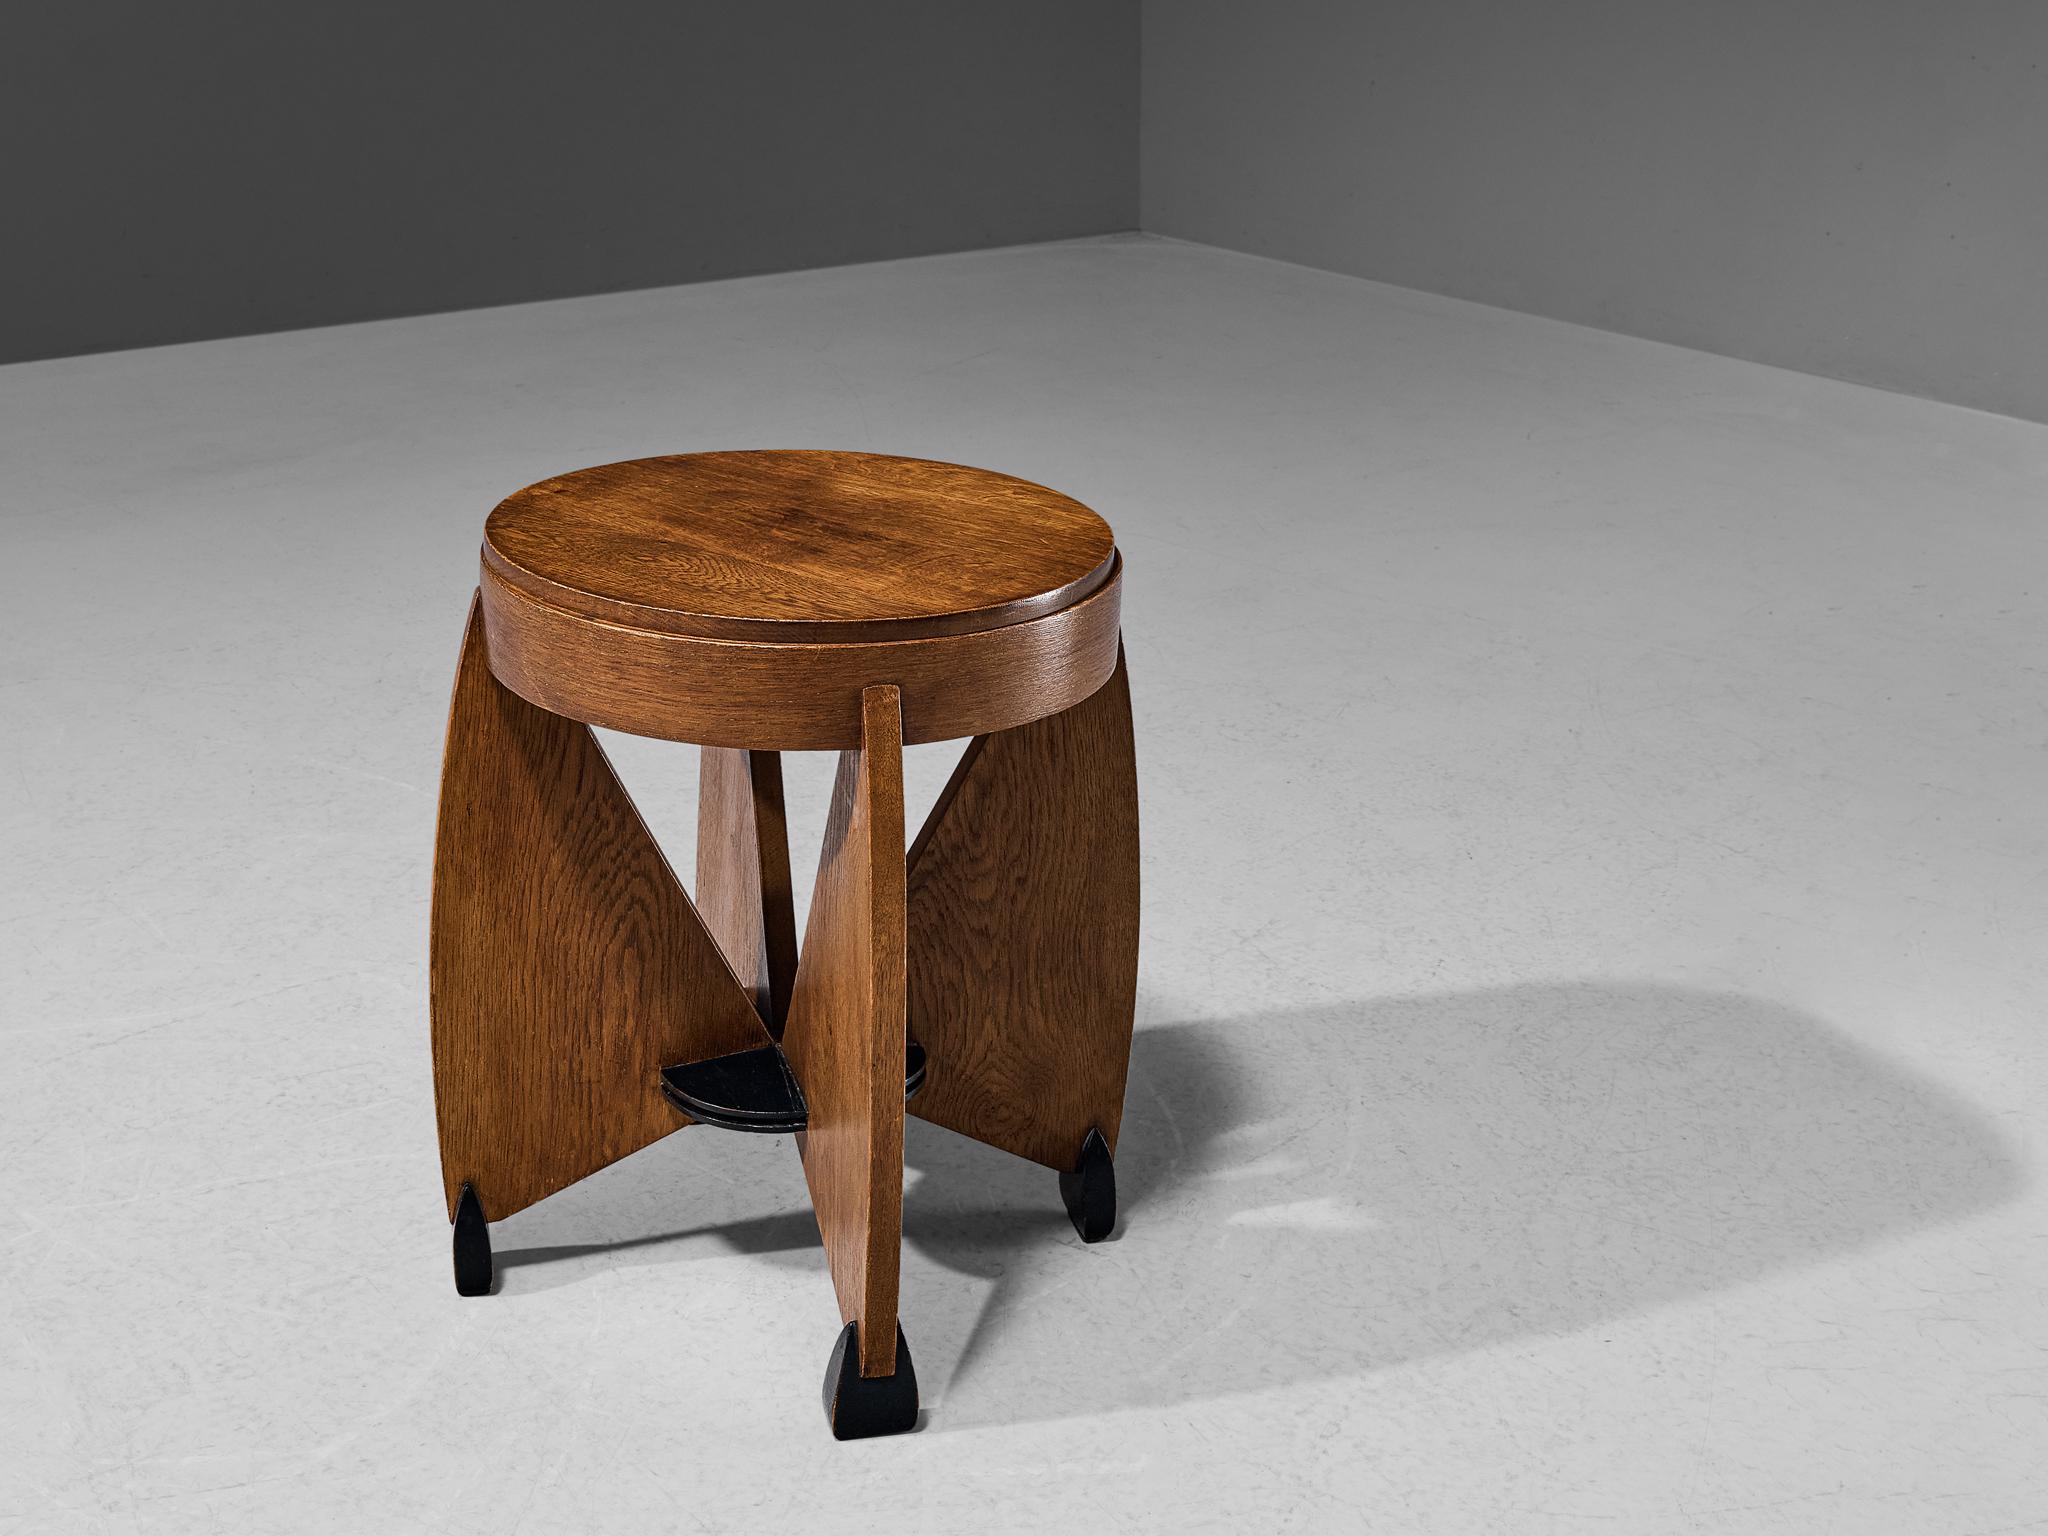 Fa. J.J. Zijfers & Co, side table, oak, Netherlands, ca. 1925

Charming Amsterdam School side table manufactured by Fa. J.J. Zijfers & Co. in the 1920s in the Netherlands. This table is executed in a natural and black stained oak. The design of